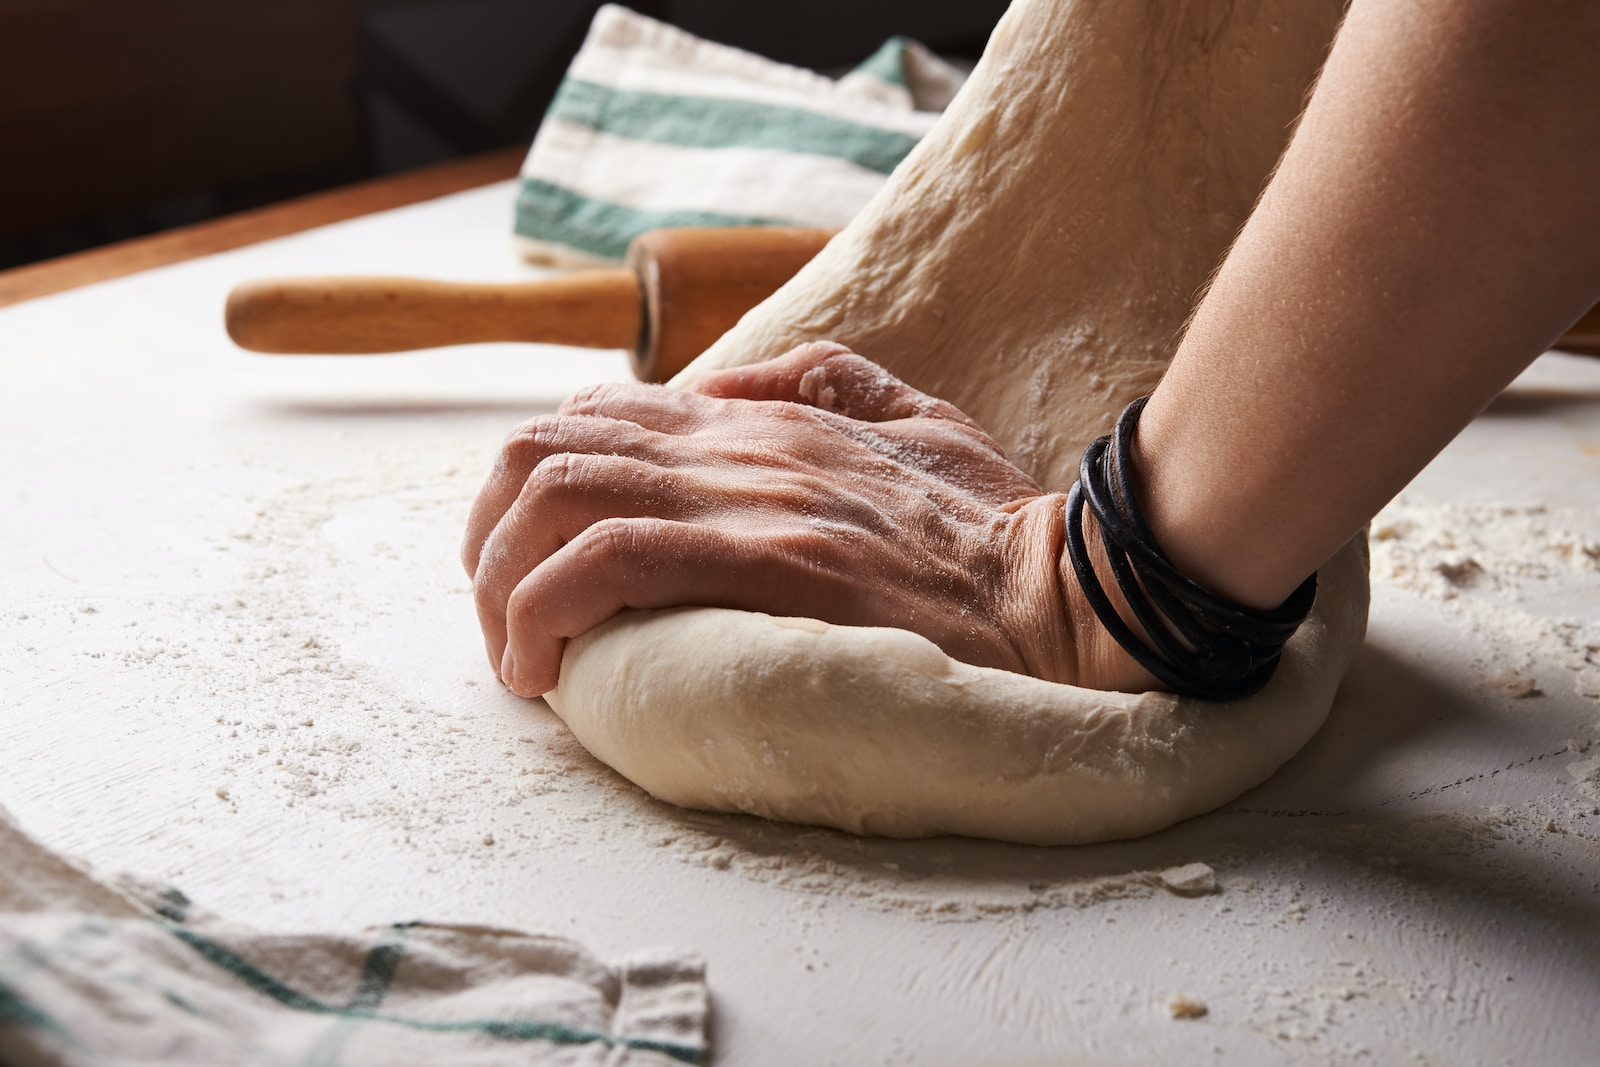 How To Certify Kitchen For A Home Bakery